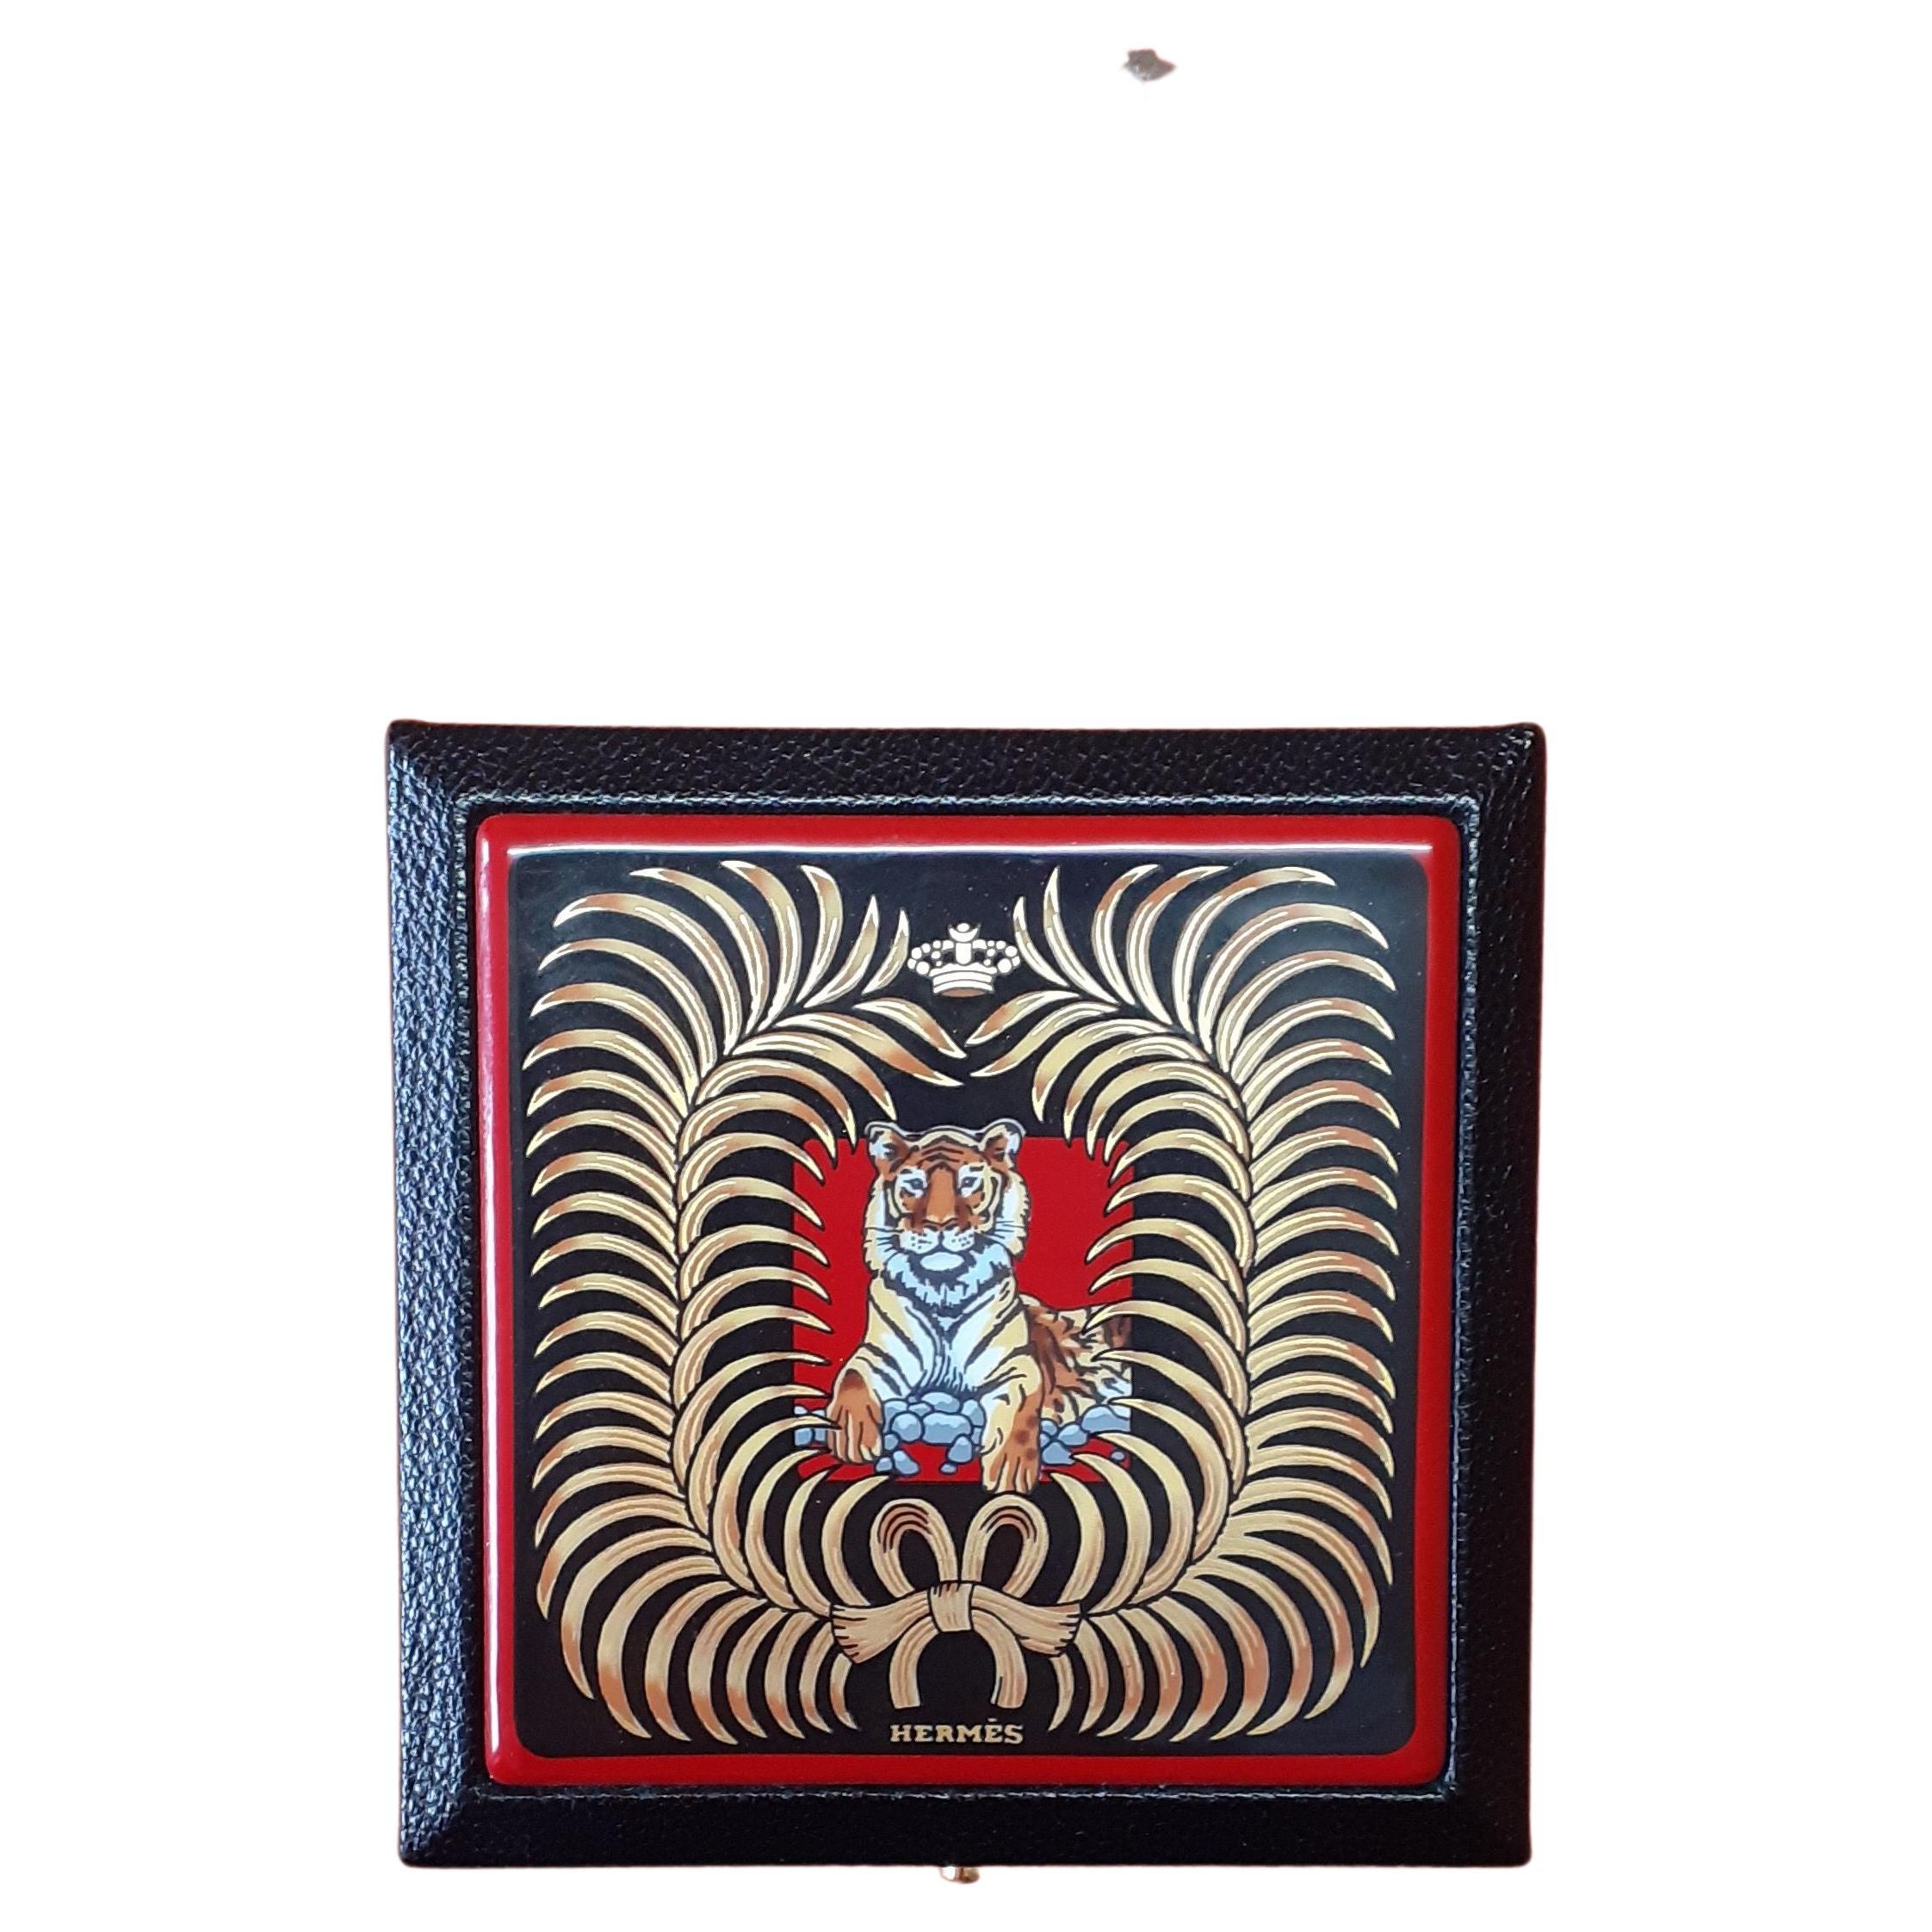 Exceptional Hermès Enamel and Leather Powder Compact Tigre Royal Print RARE